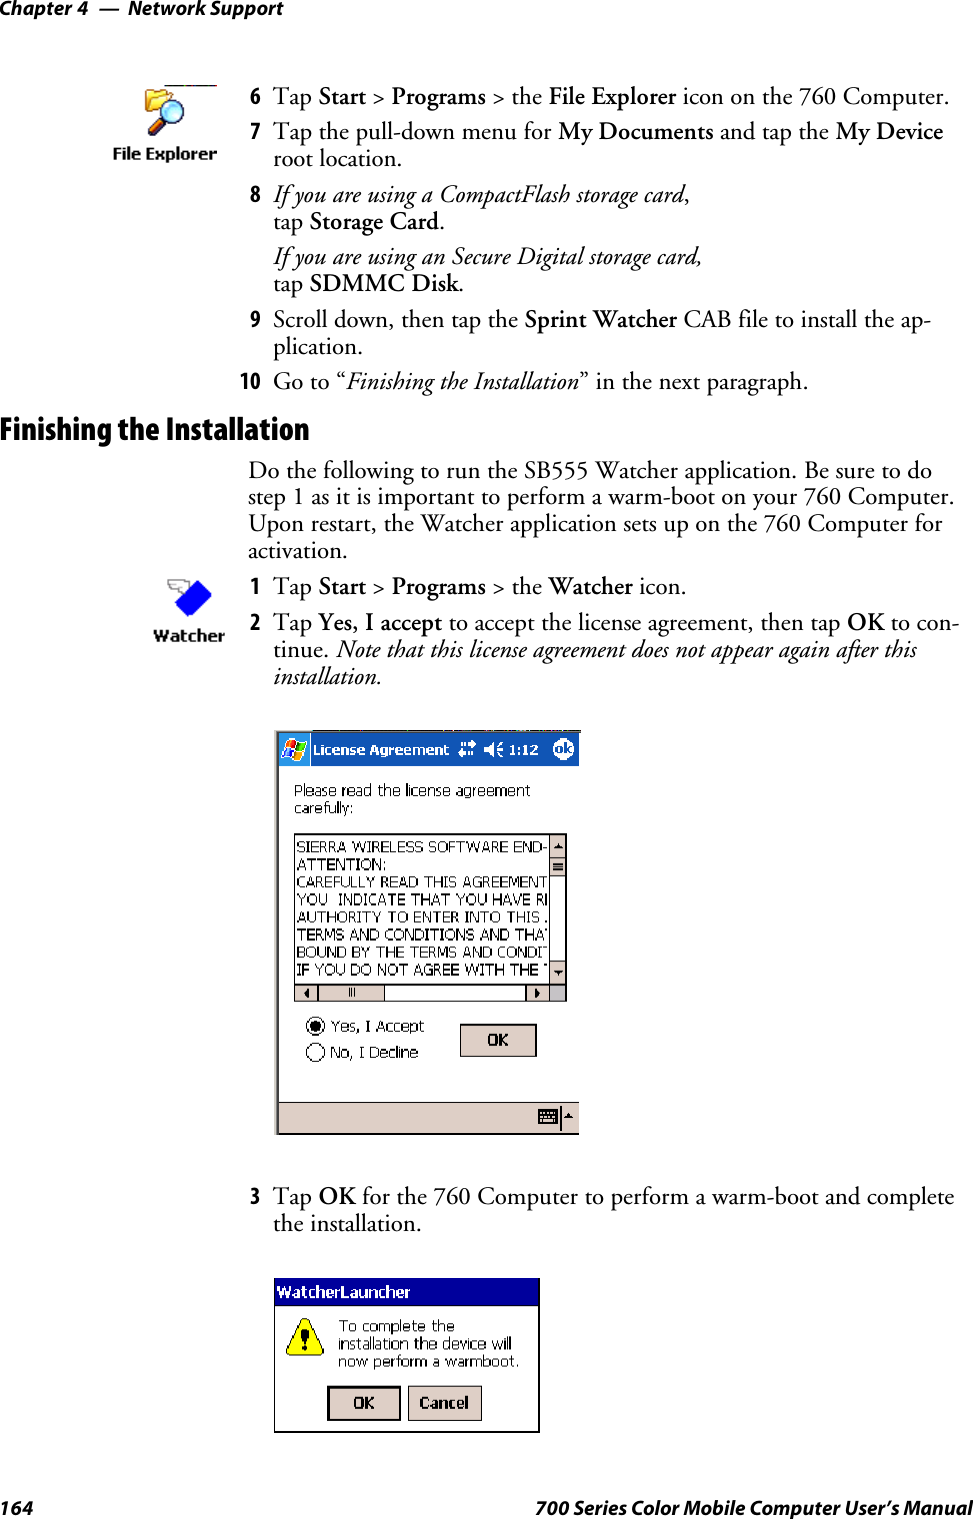 Network SupportChapter —4164 700 Series Color Mobile Computer User’s Manual6Tap Start &gt;Programs &gt;theFile Explorer icon on the 760 Computer.7Tap the pull-down menu for My Documents and tap the My Deviceroot location.8If you are using a CompactFlash storage card,tap Storage Card.If you are using an Secure Digital storage card,tap SDMMC Disk.9Scroll down, then tap the Sprint Watcher CAB file to install the ap-plication.10 Go to “Finishing the Installation” in the next paragraph.Finishing the InstallationDo the following to run the SB555 Watcher application. Be sure to dostep 1 as it is important to perform a warm-boot on your 760 Computer.Upon restart, the Watcher application sets up on the 760 Computer foractivation.1Tap Start &gt;Programs &gt;theWatcher icon.2Tap Yes, I accept to accept the license agreement, then tap OK to con-tinue. Note that this license agreement does not appear again after thisinstallation.3Tap OK for the 760 Computer to perform a warm-boot and completethe installation.